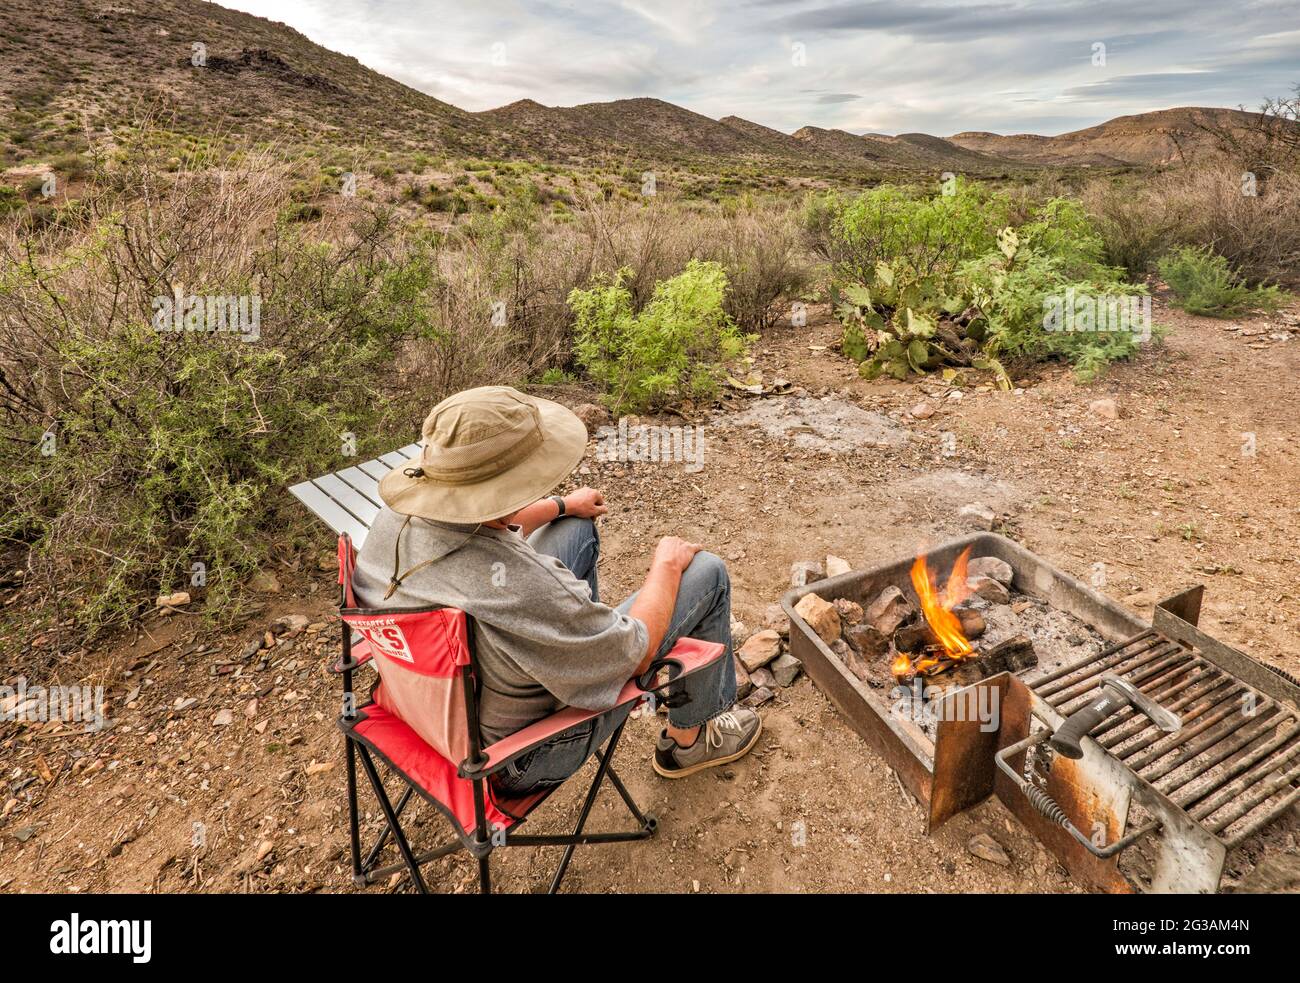 Camper relaxing at Tres Papalotes, campsite in El Solitario area, collapsed and eroded volcanic dome, Big Bend Ranch State Park, Texas, USA Stock Photo